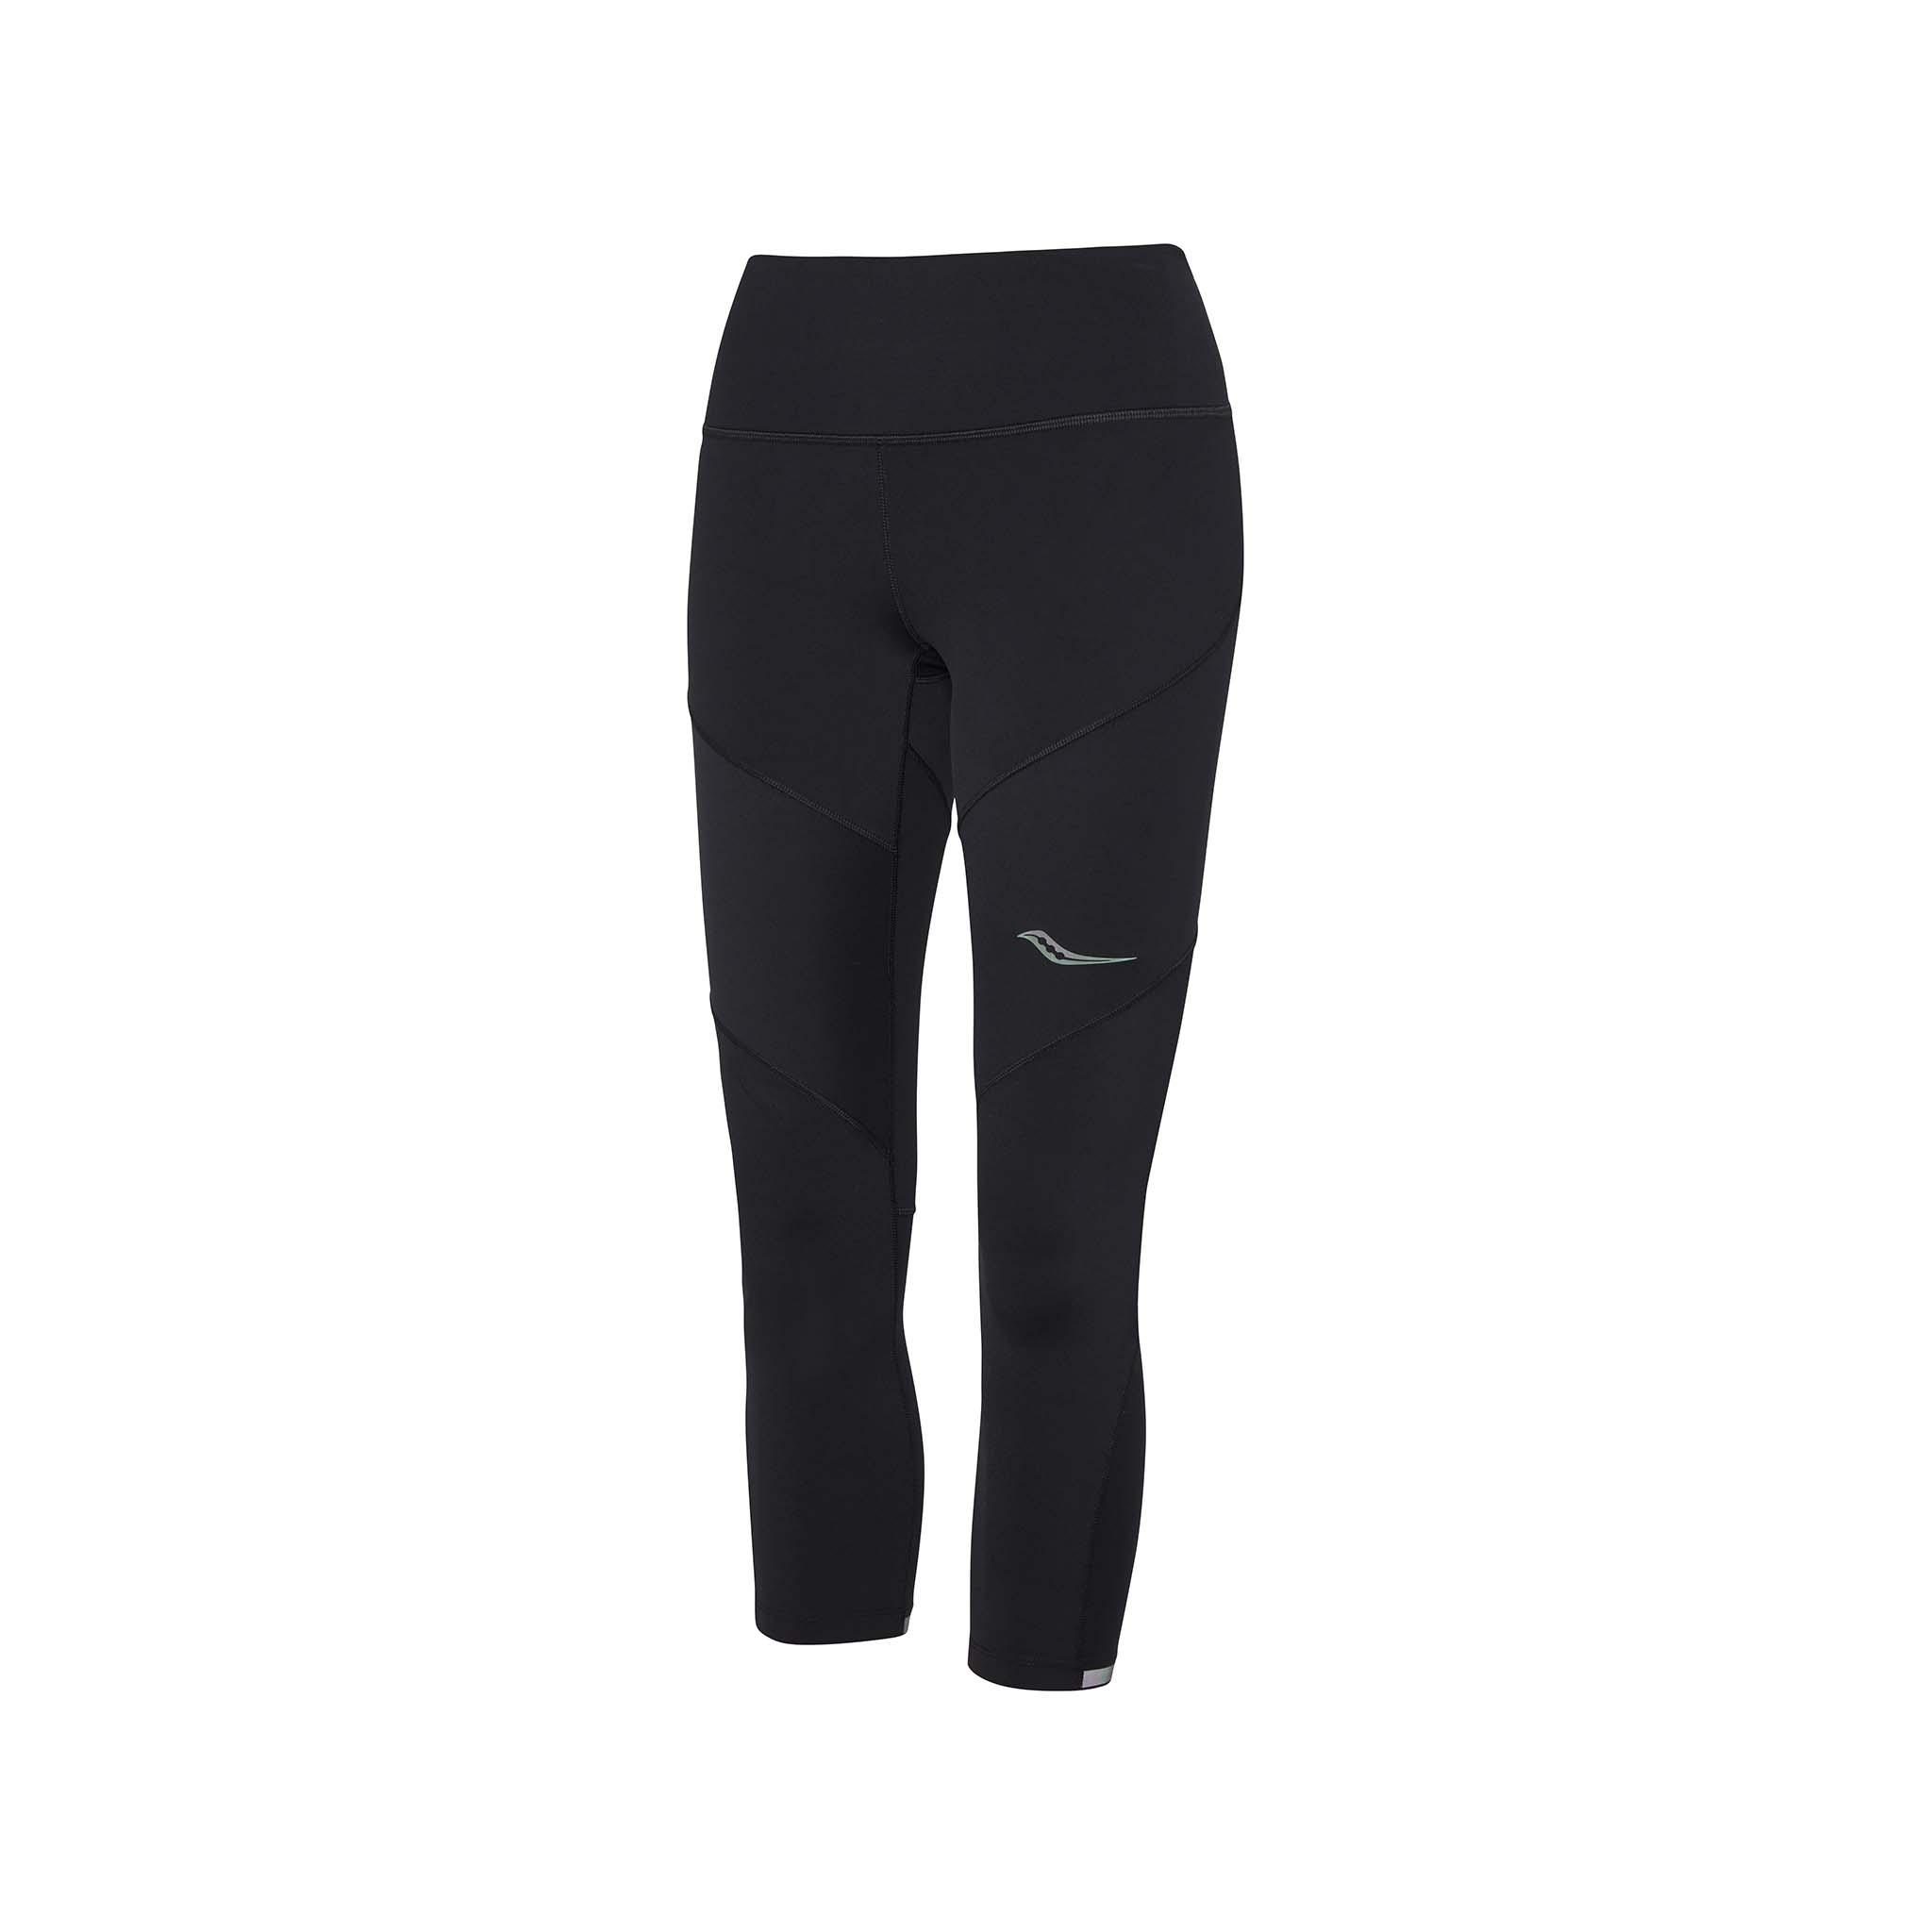 Saucony Time Trial Crop Tight running leggings for women